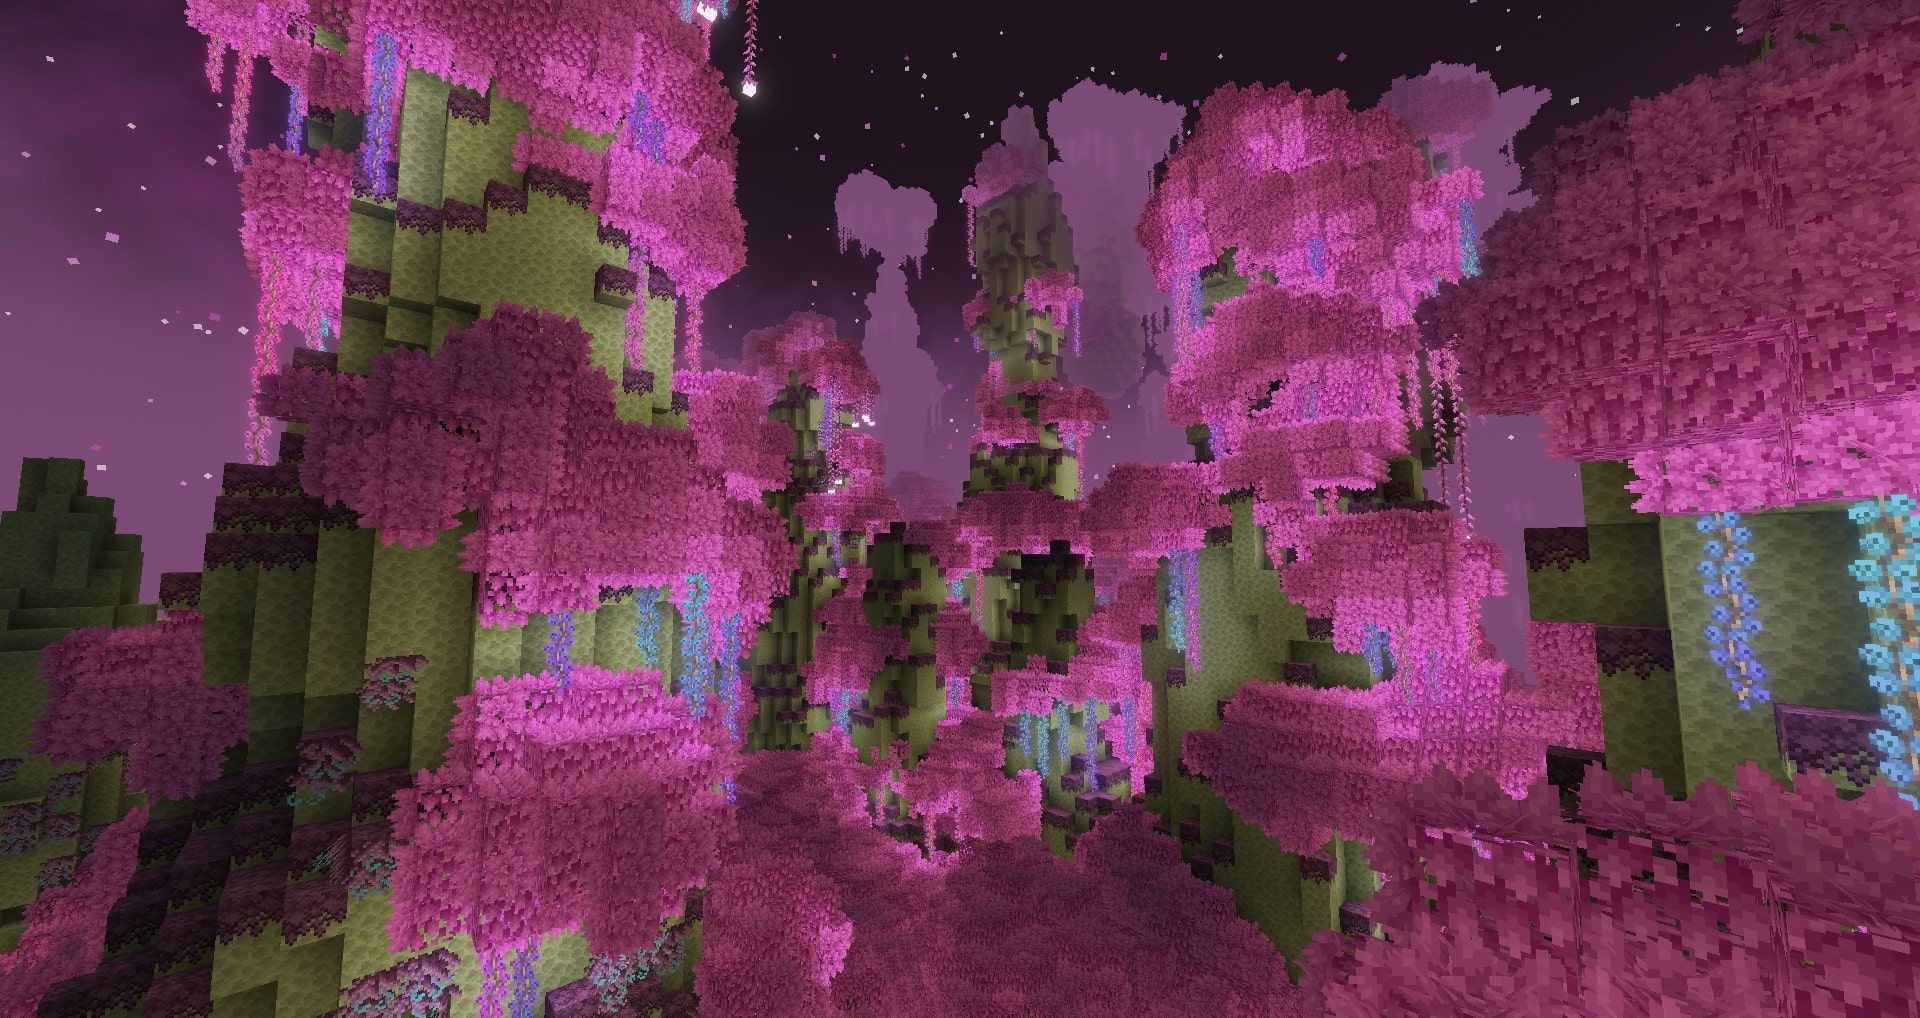 A scenic screenshot of a new biome in The End, with towering hills of pink trees and glowing blossoms that hang from them.